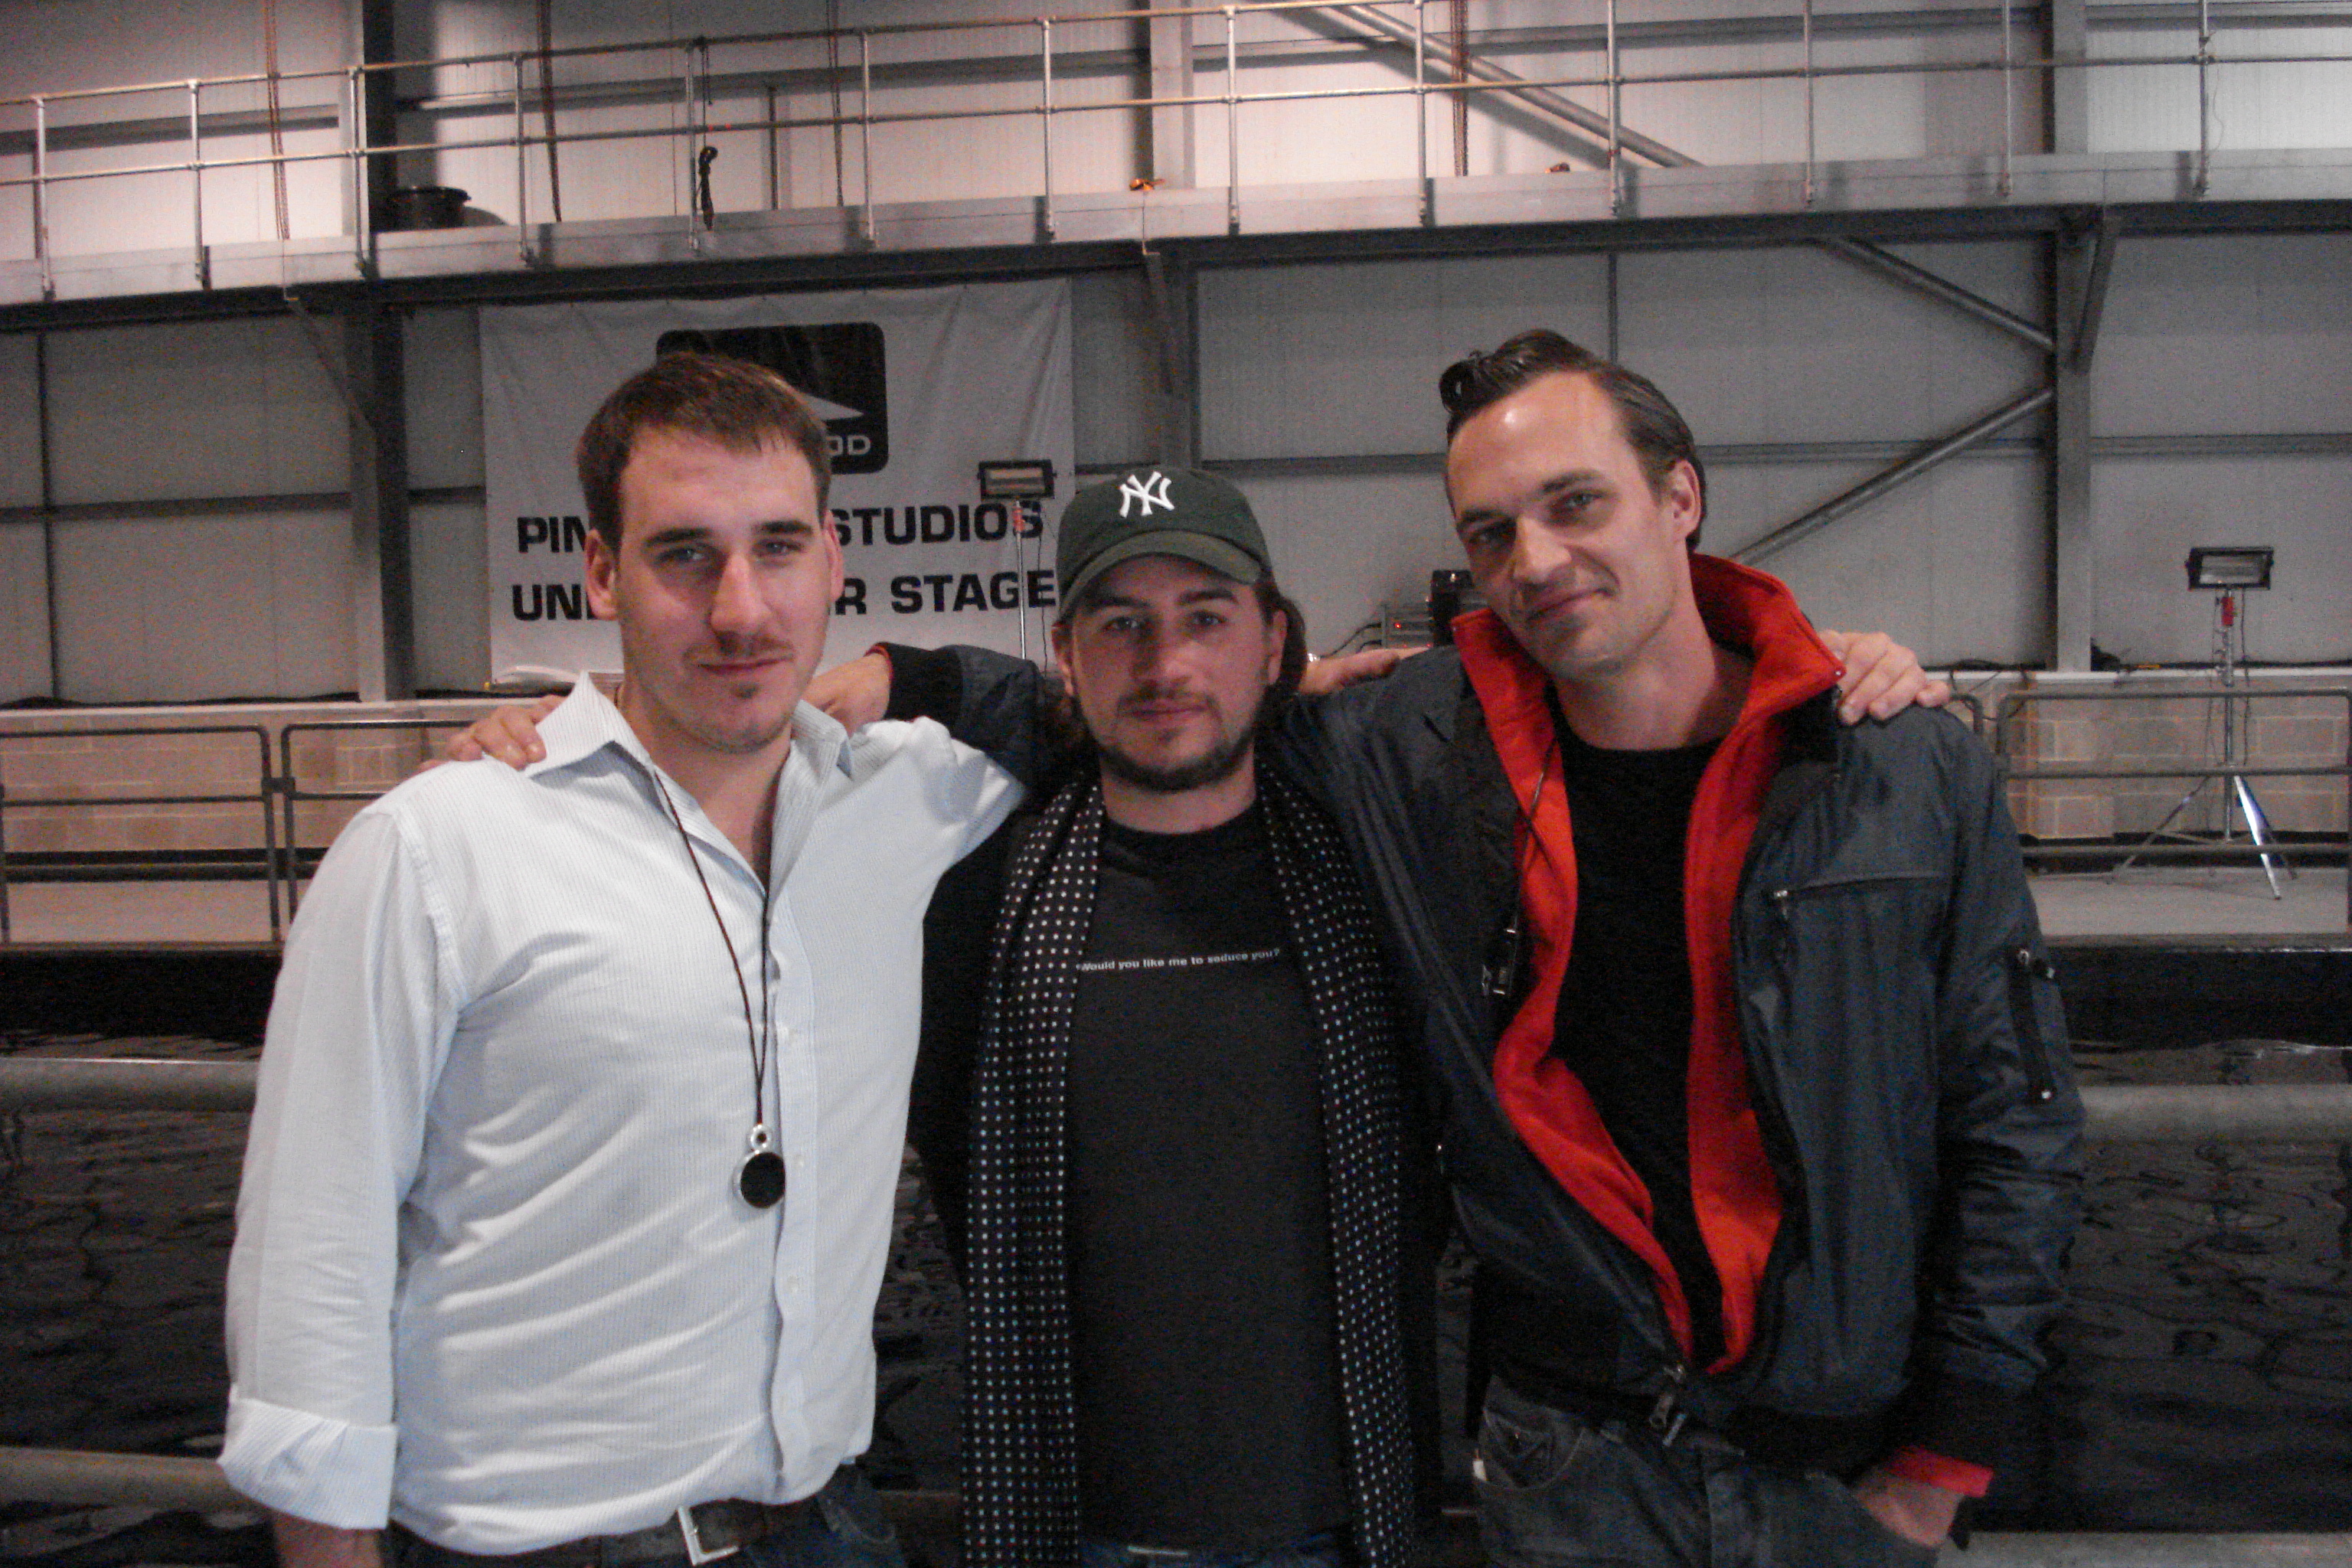 At Pinewood underwater stage, filming Ghost-in this photo-Craig Viveiros (director), James Friend (DOP), and myself.